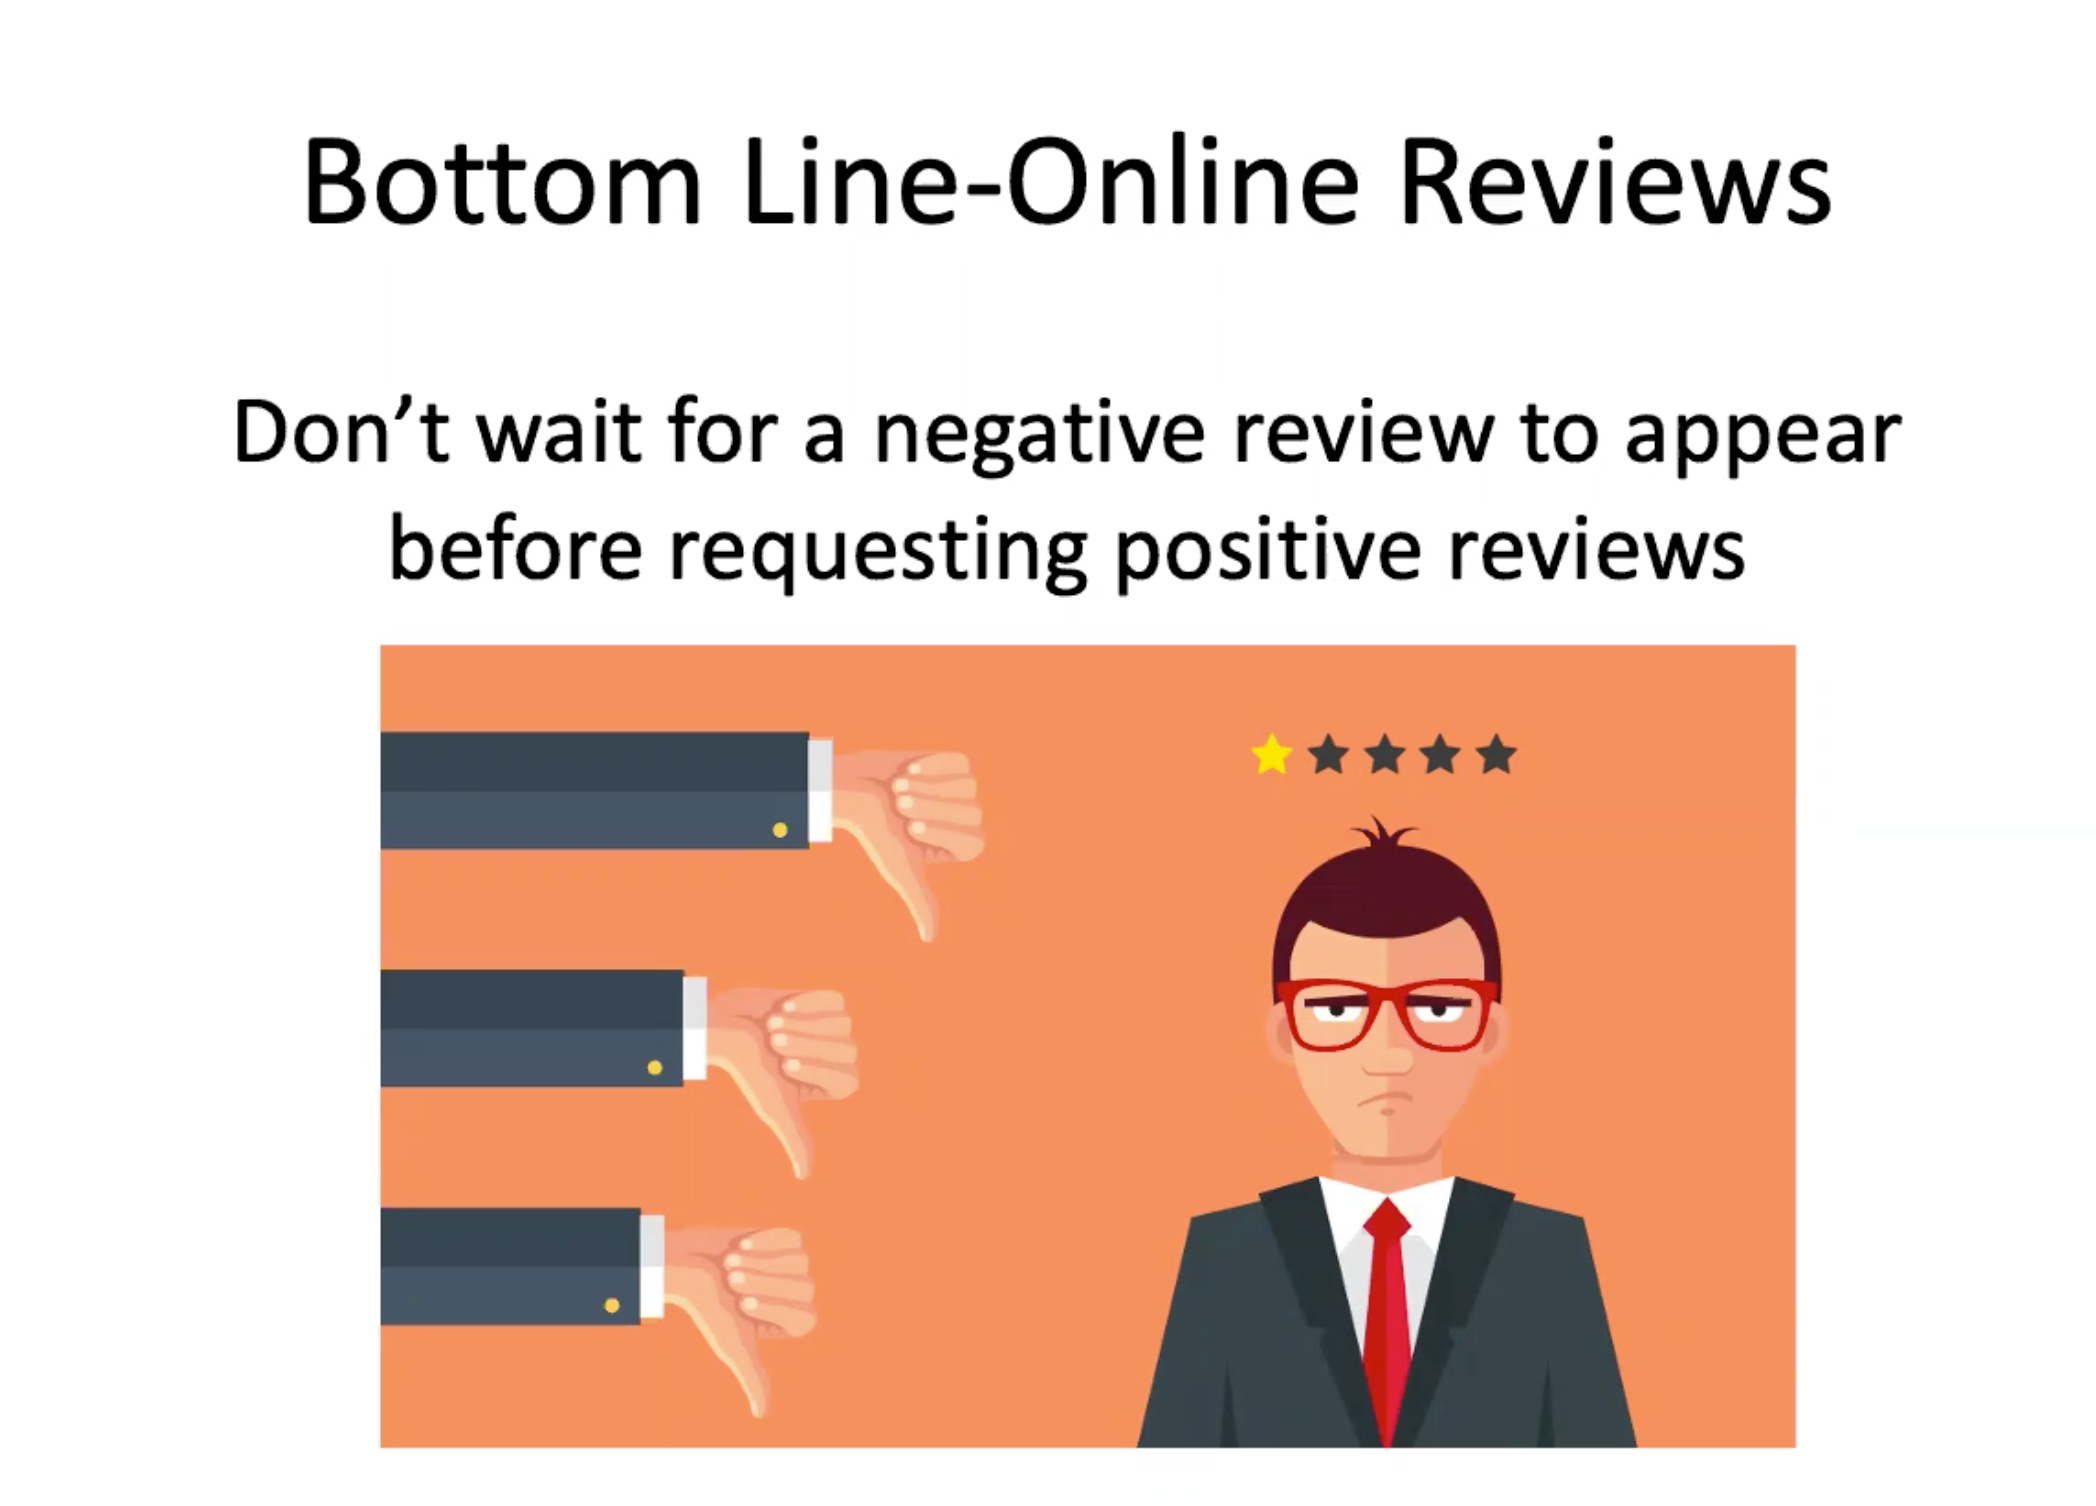 Patient reviews: How to protect and enhance your online reputation